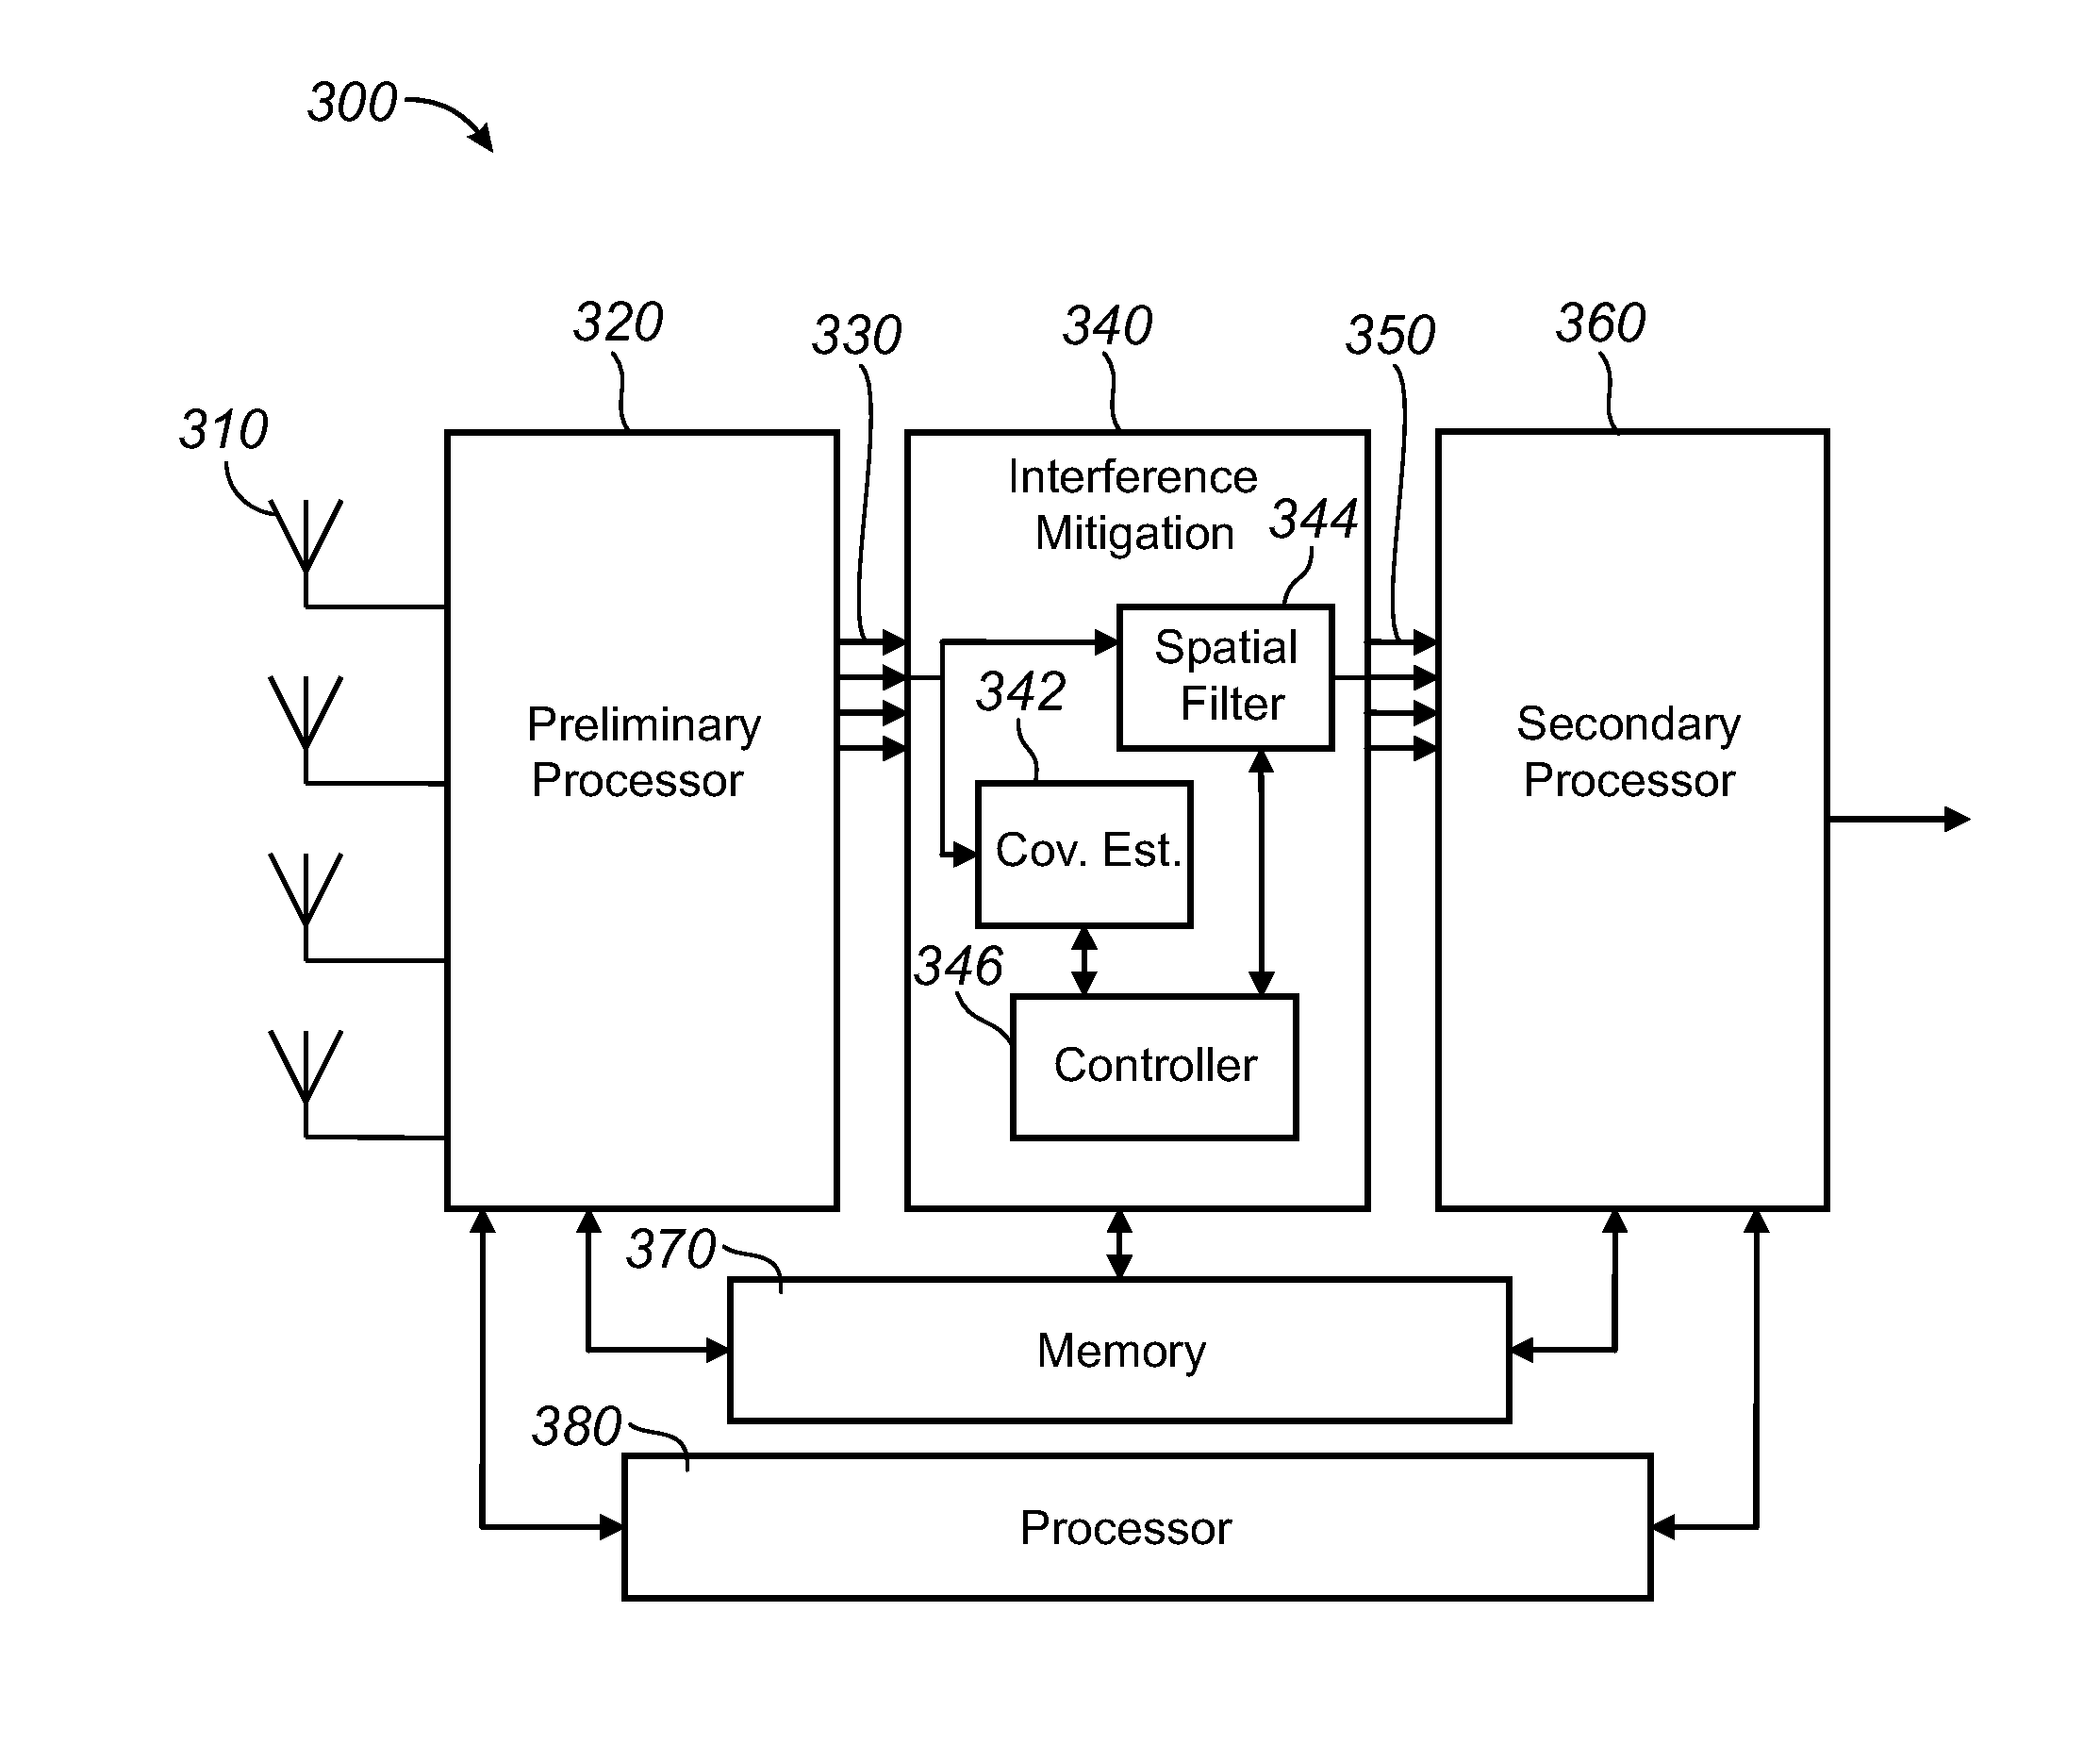 Wideband interference mitigation for devices with multiple receivers